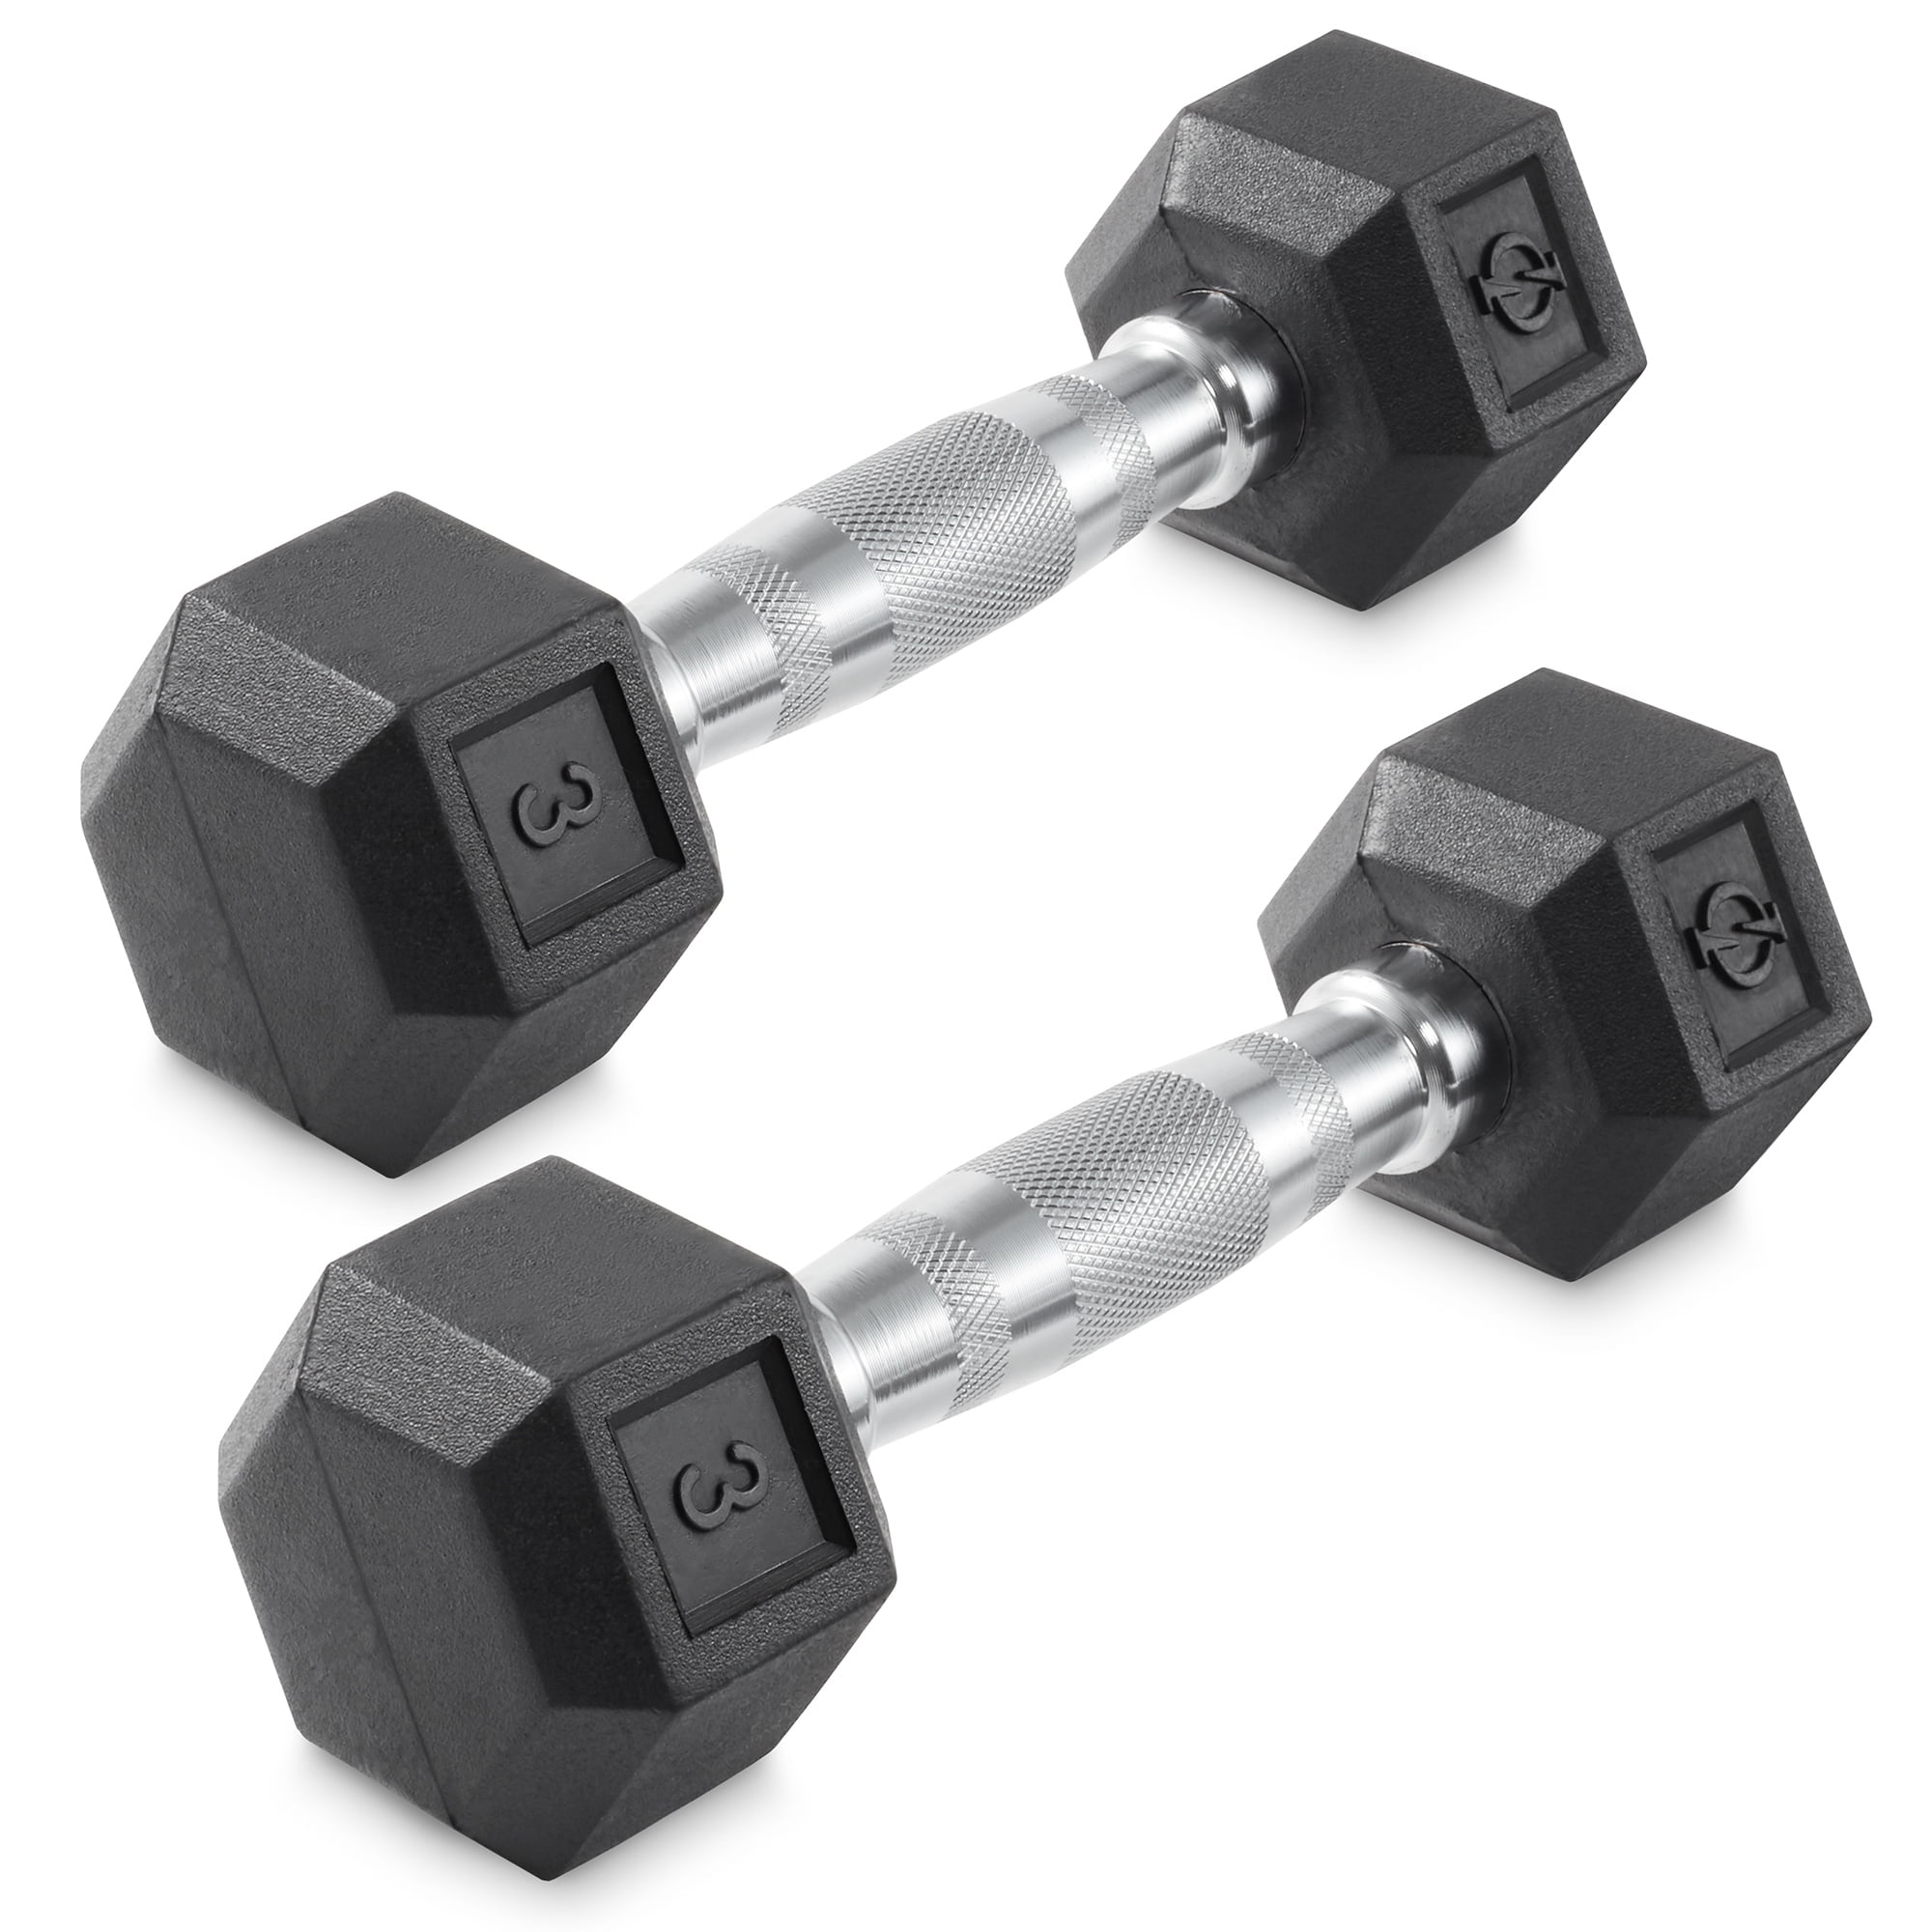 Fitness Gear Cast Iron Hex Dumbbells 5 LB Set or Total 10 LBS FAST SHIP NEW 